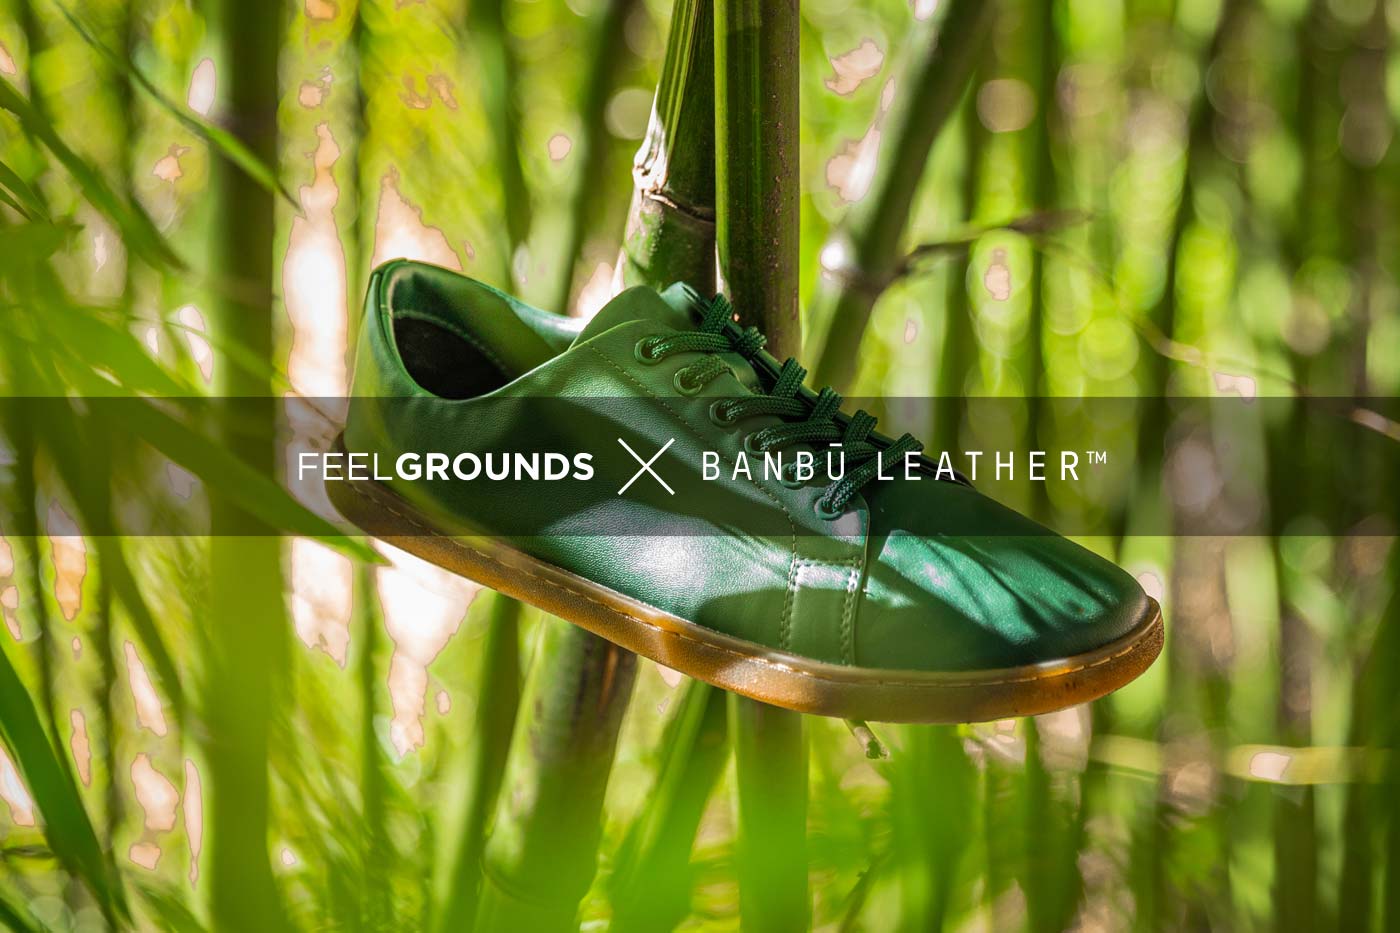 Original Bamboo: Redefining eco-conscious footwear with Banbū Leather™